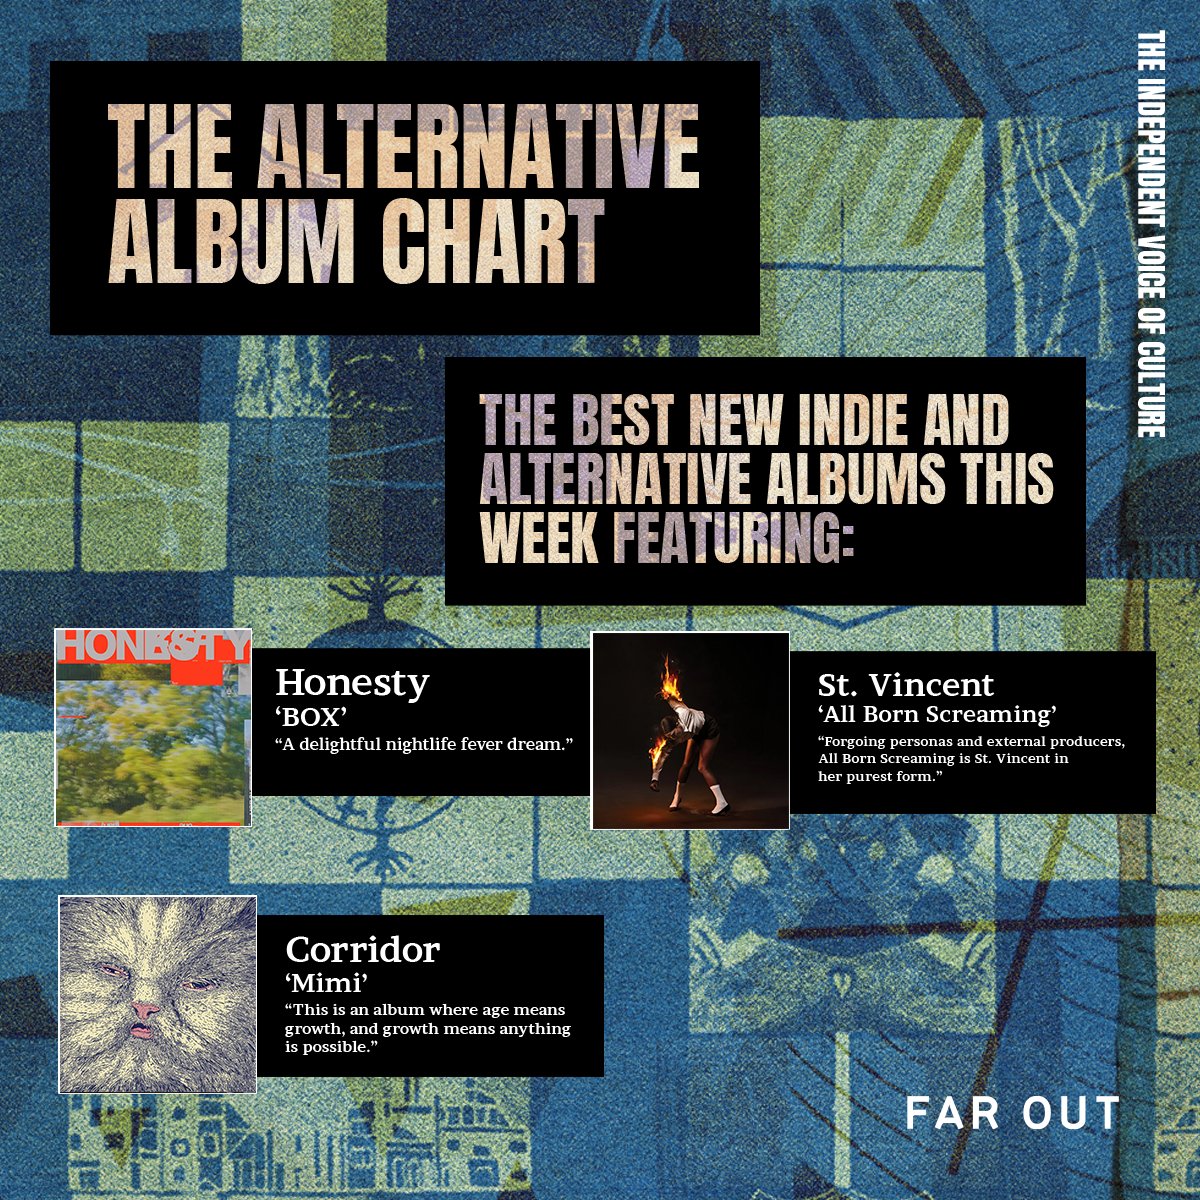 The Alternative Album Chart: the best new indie and alternative albums this week Featuring: Honesty, @st_vincent, @corridormtl and many more 🎧 Full feature 👇 faroutmagazine.co.uk/alternative-al…